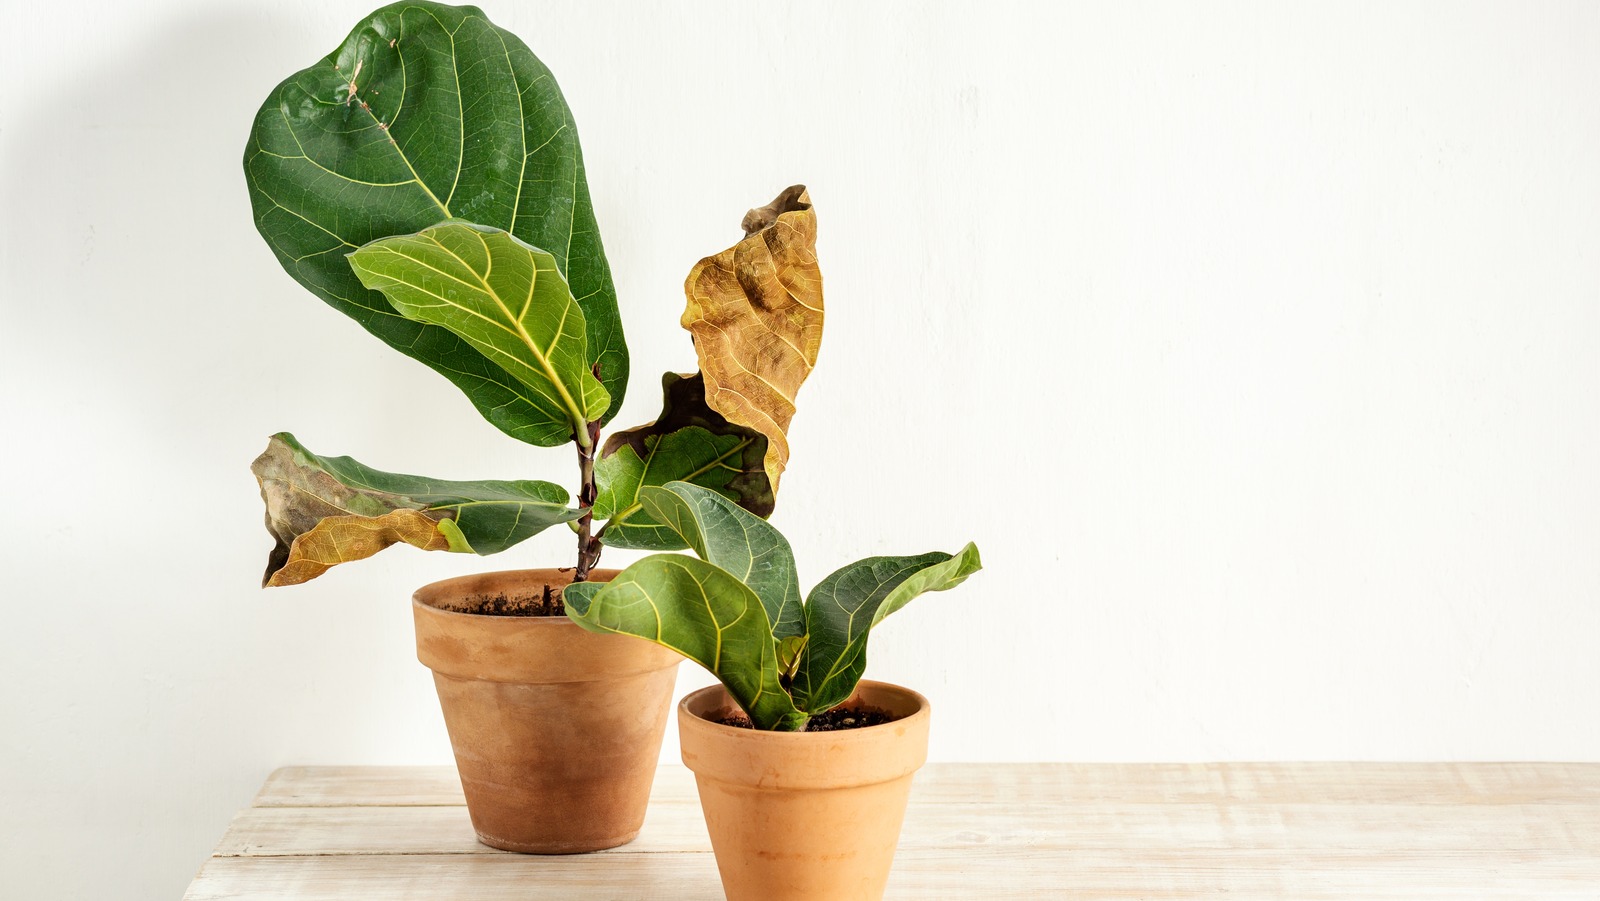 https://www.housedigest.com/img/gallery/it-may-not-be-too-late-to-bring-your-dried-out-fiddle-leaf-fig-back-to-life-heres-how/l-intro-1693602704.jpg